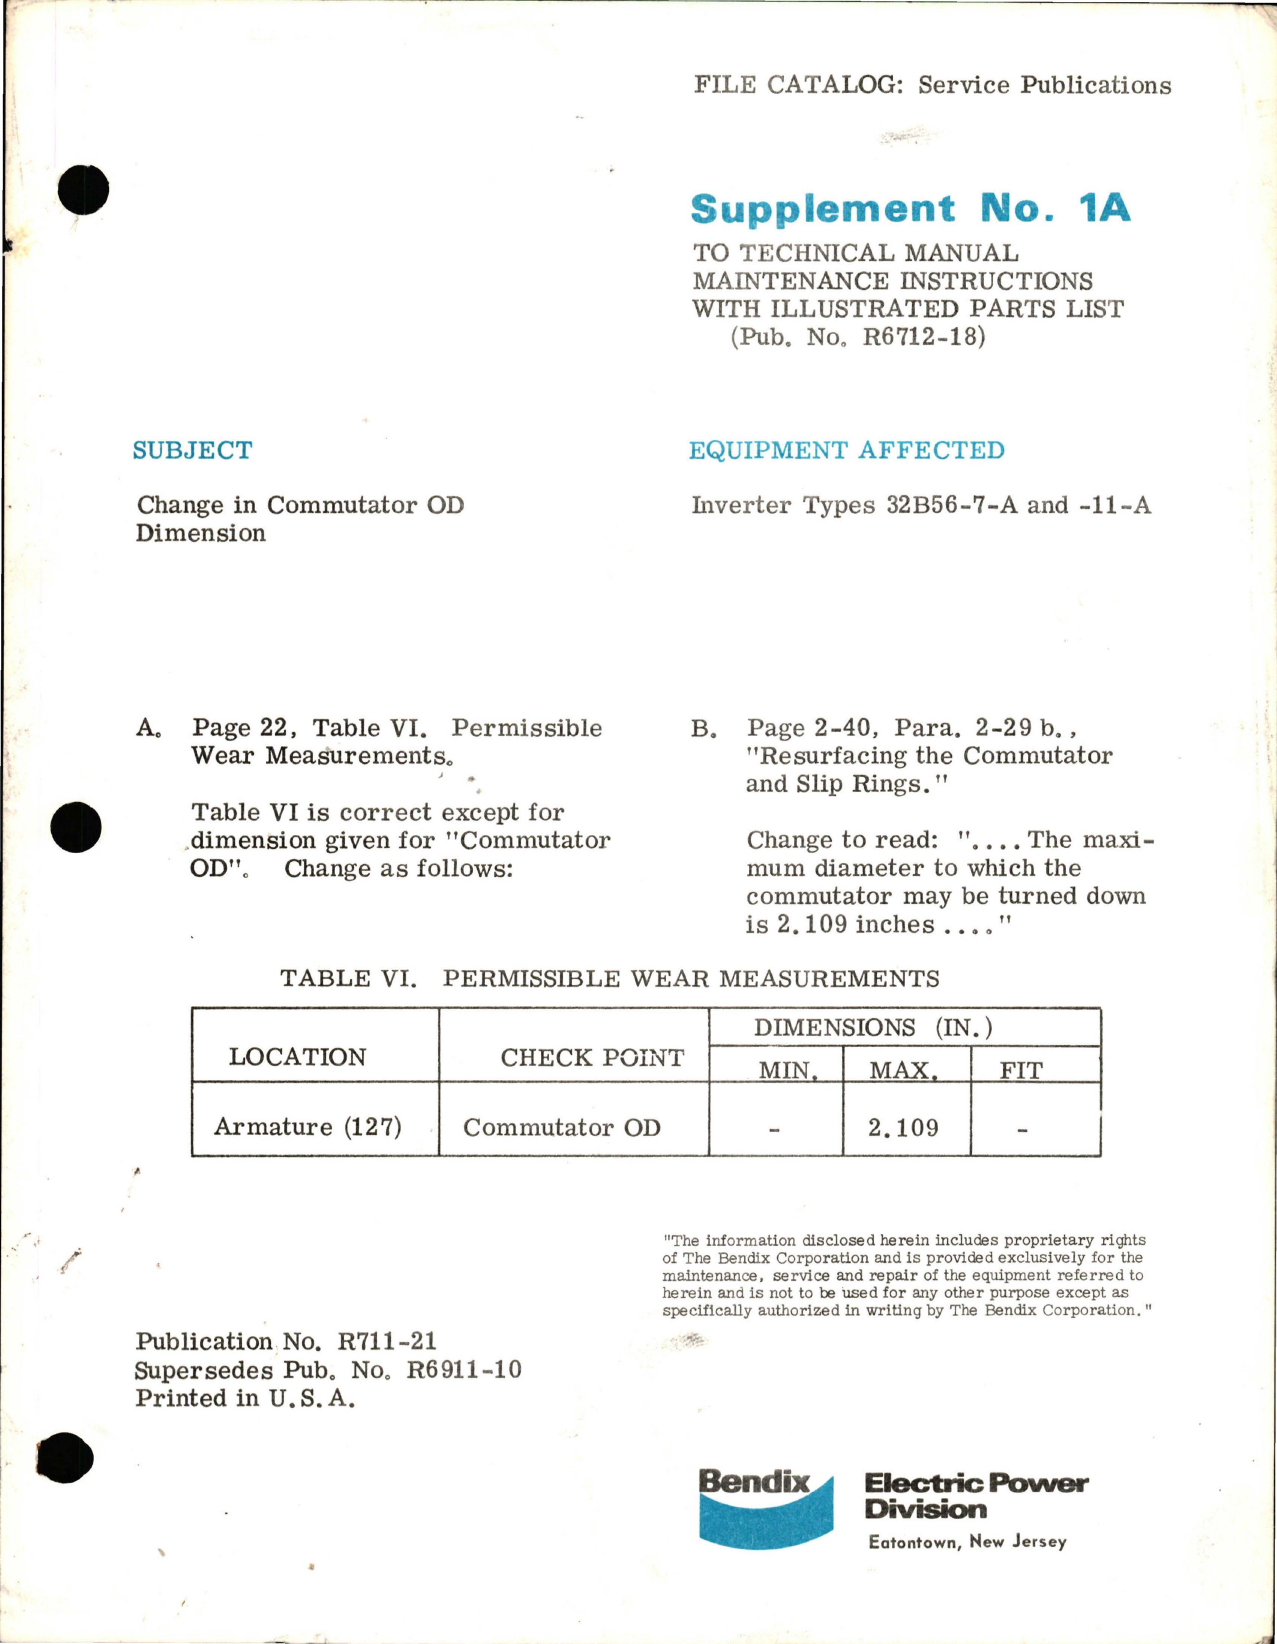 Sample page 1 from AirCorps Library document: Supplement No. 1A to Maintenance Instructions with Illustrated Parts List for Inverter - Types 32B56-7-A, 32B56-11-A